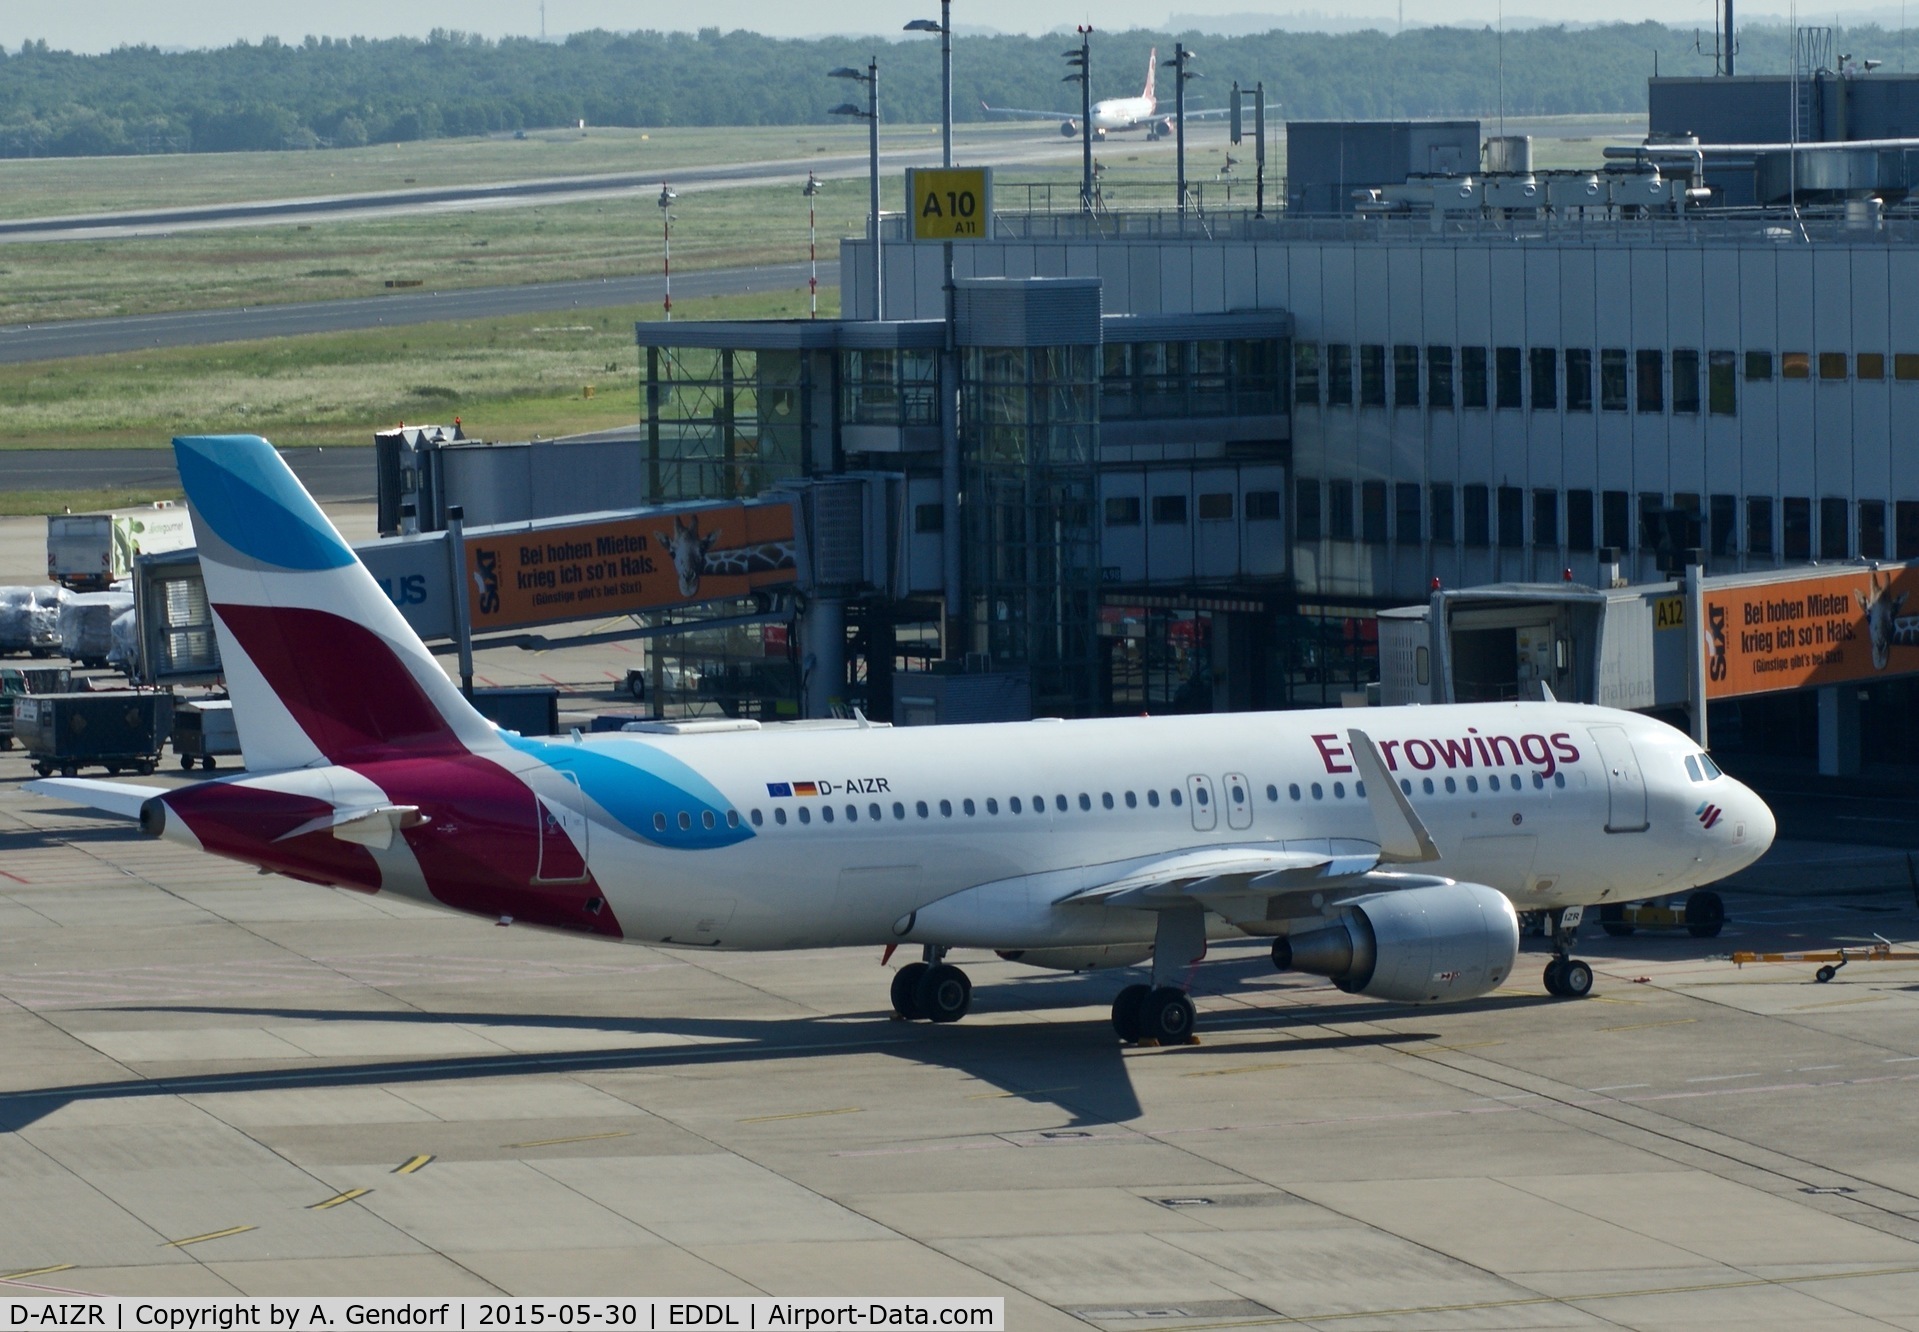 D-AIZR, 2013 Airbus A320-214 C/N 5525, Eurowings, seen here at the gate at Düsseldorf Int'l(EDDL), waiting for the next flight